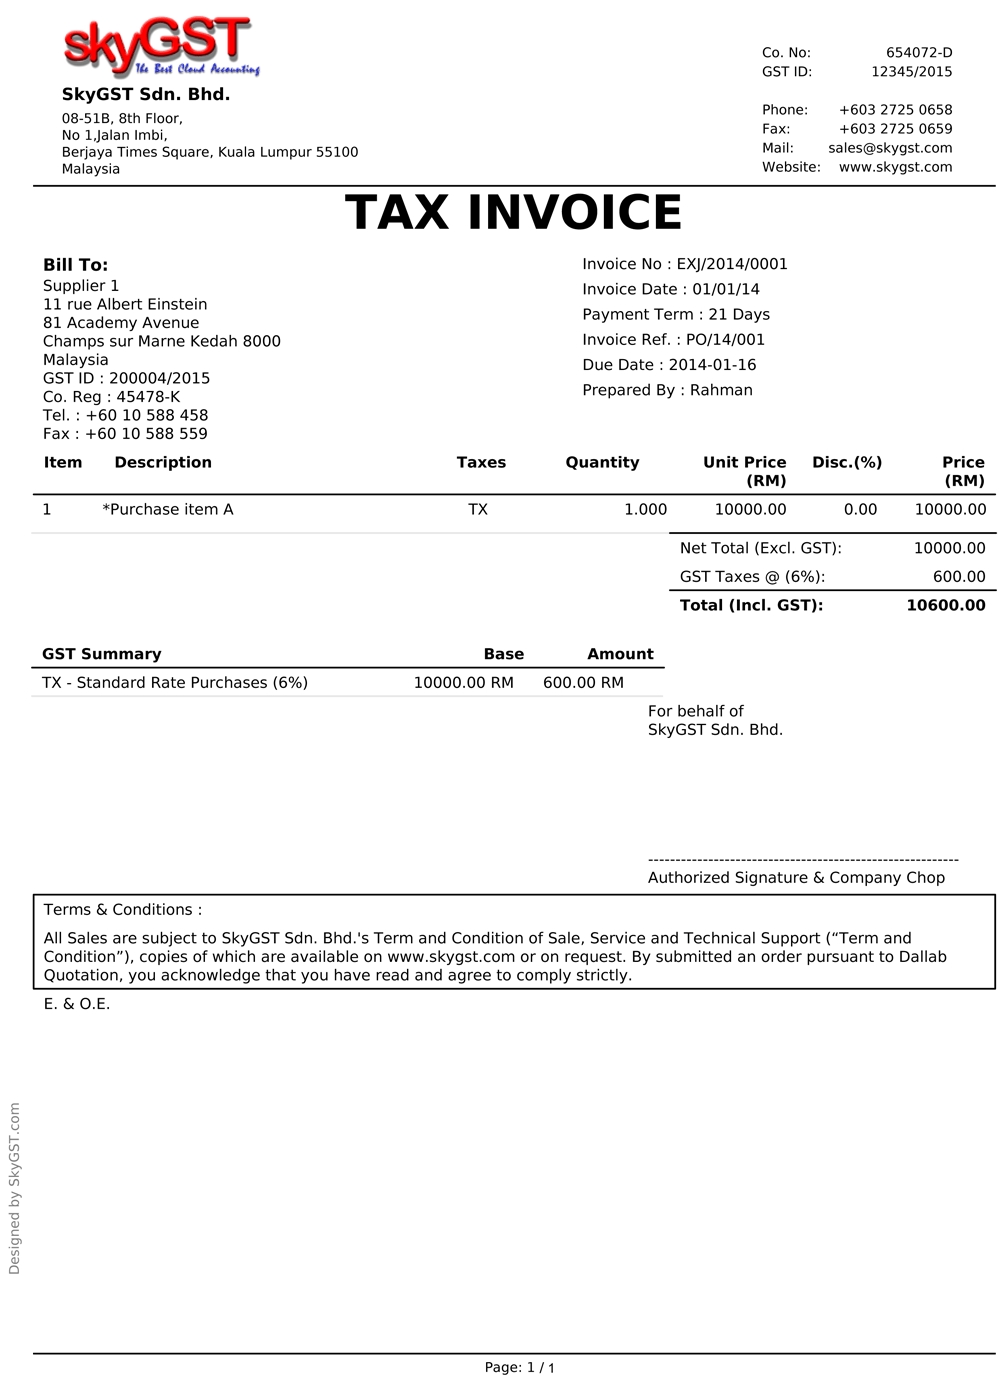 sample invoice with gst hamlersd7 example of gst tax invoice